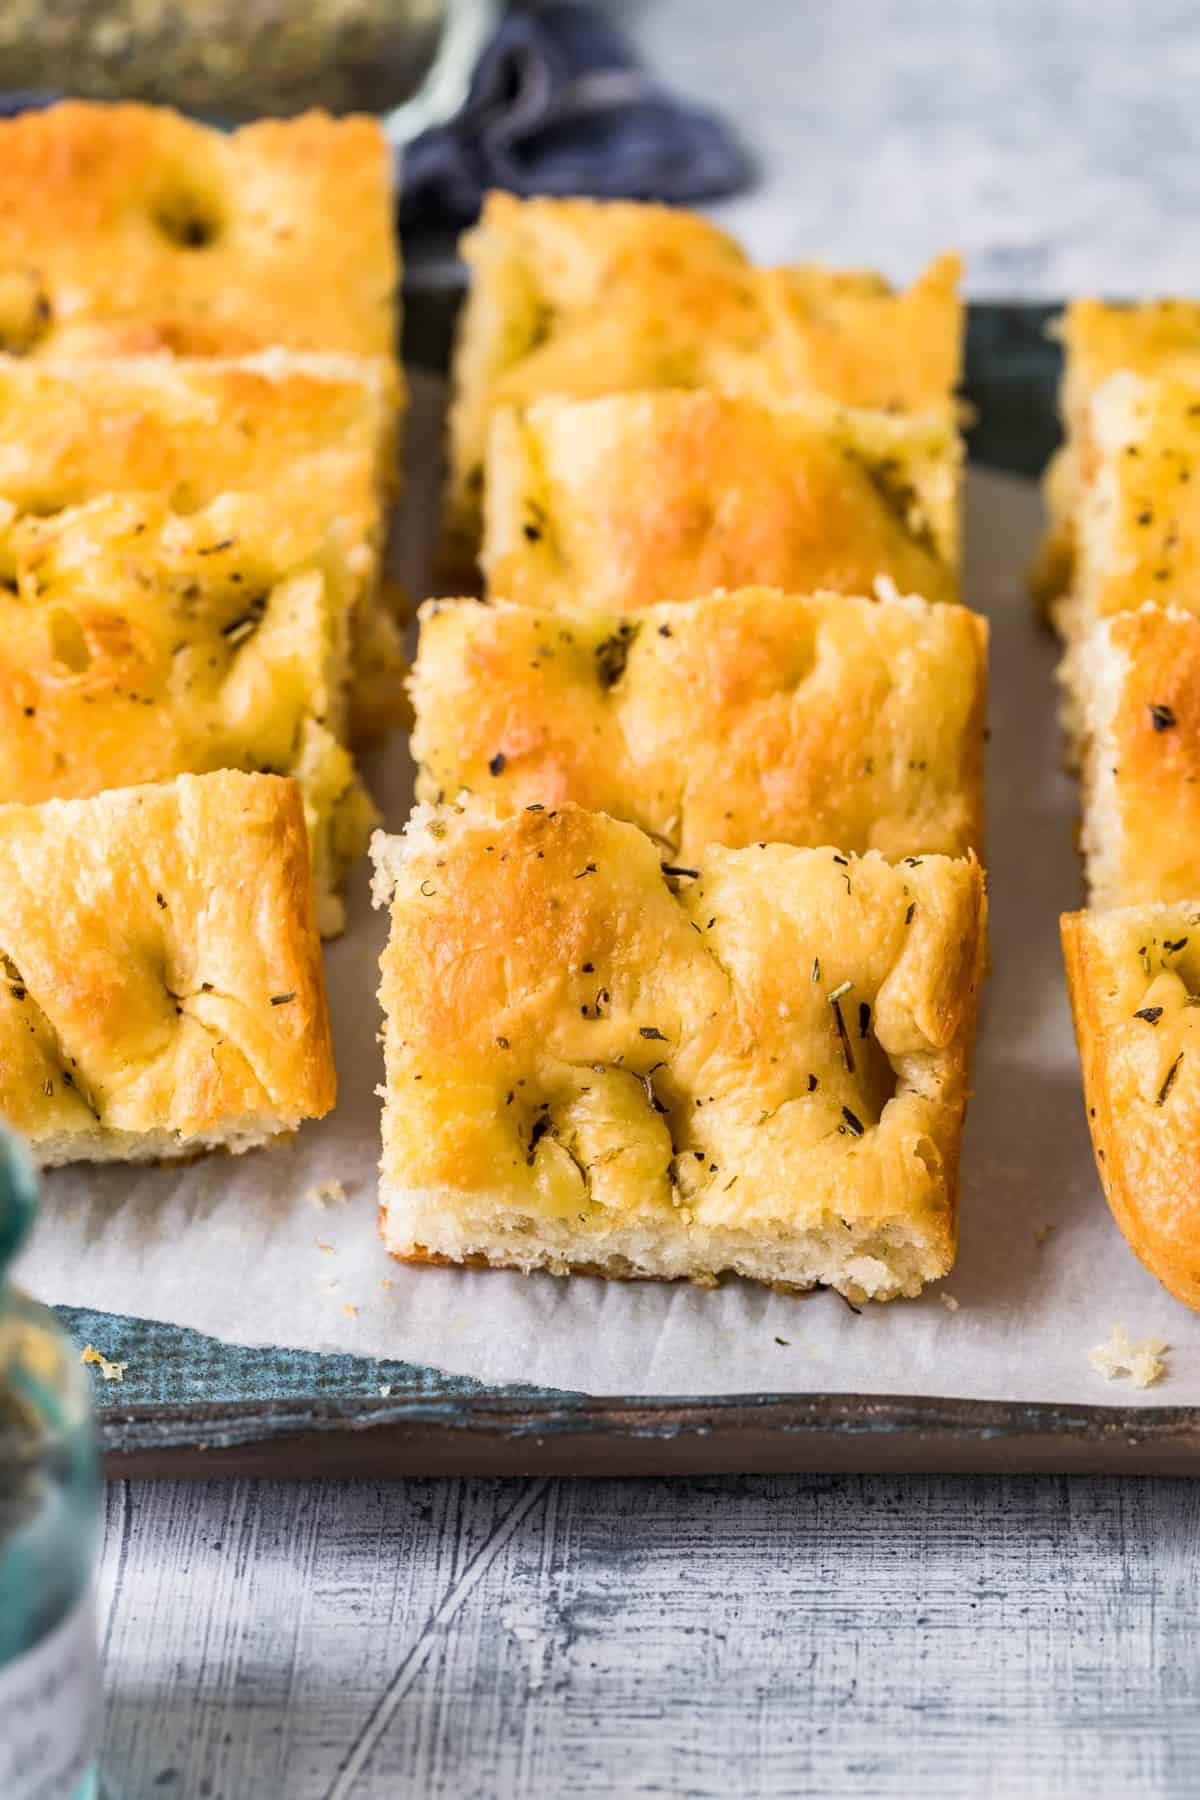 Herb topped focaccia bread